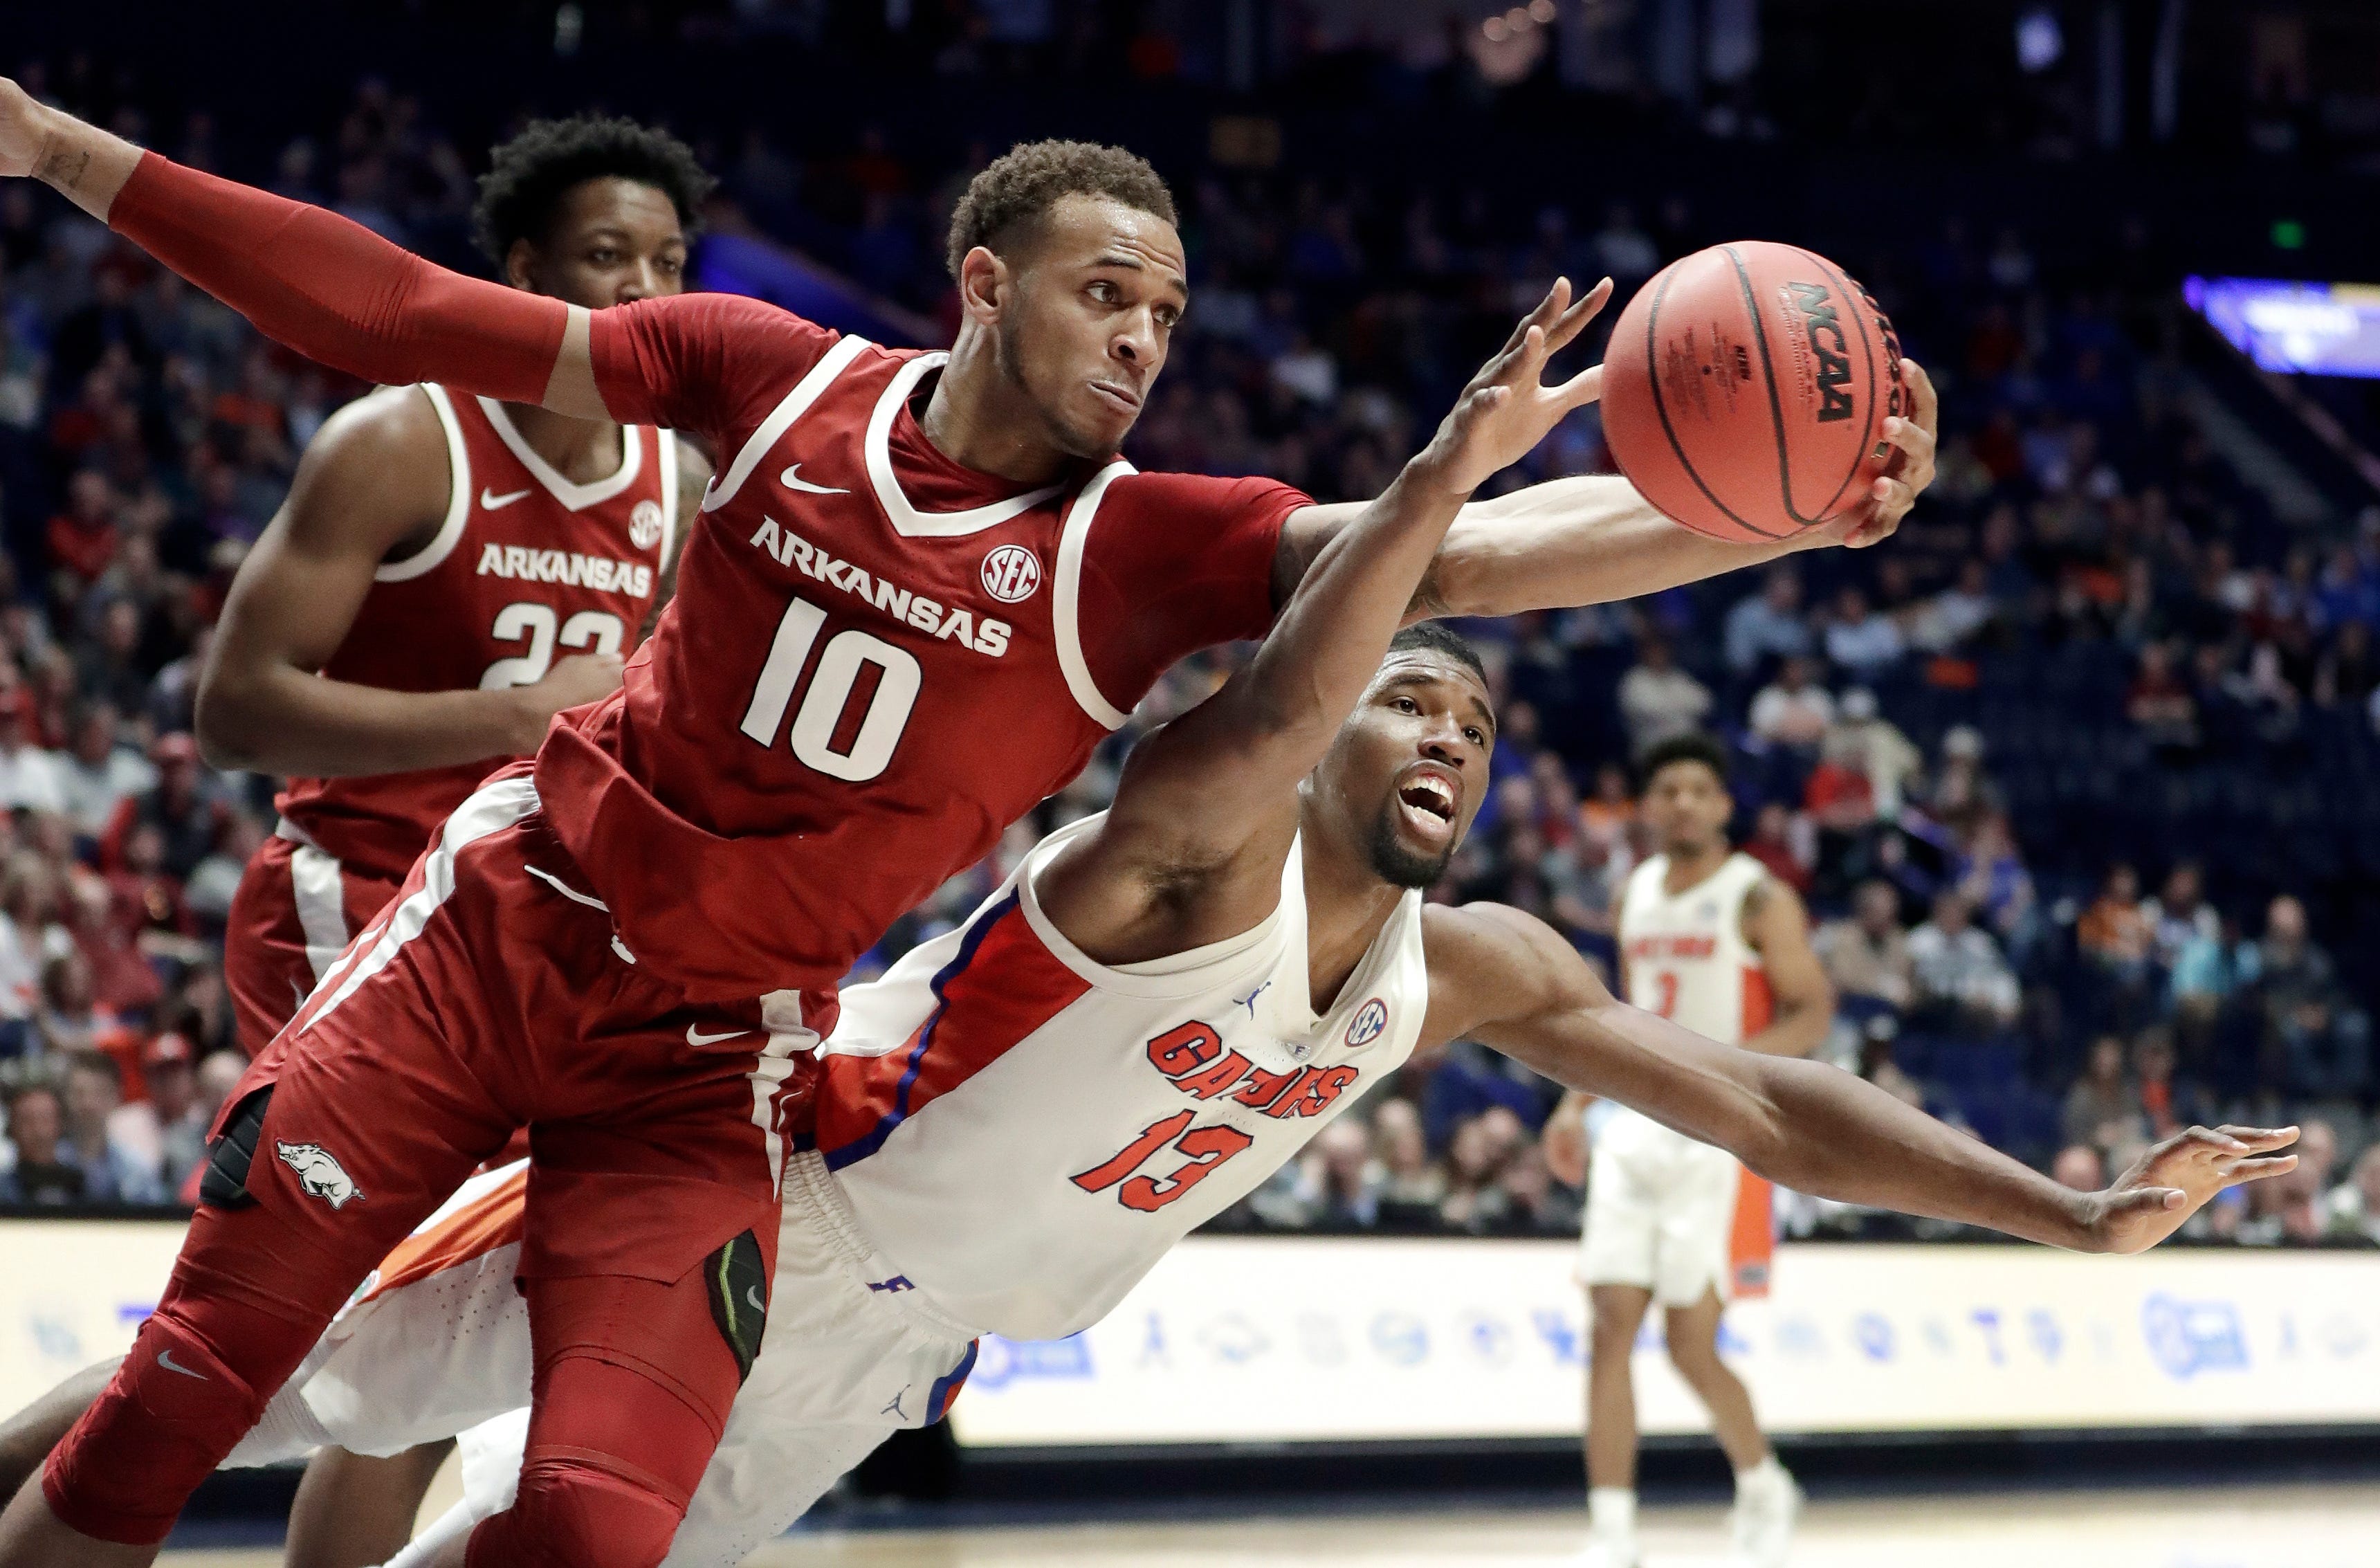 30. Milwaukee Bucks: Daniel Gafford, center, Arkansas. The Bucks always can add talented big men and Gafford showed that he can play inside, with 16.9 points and 8.7 rebounds, shooting 66 percent from the field. He’s athletic around the rim and his defense can add to their already scary interior.